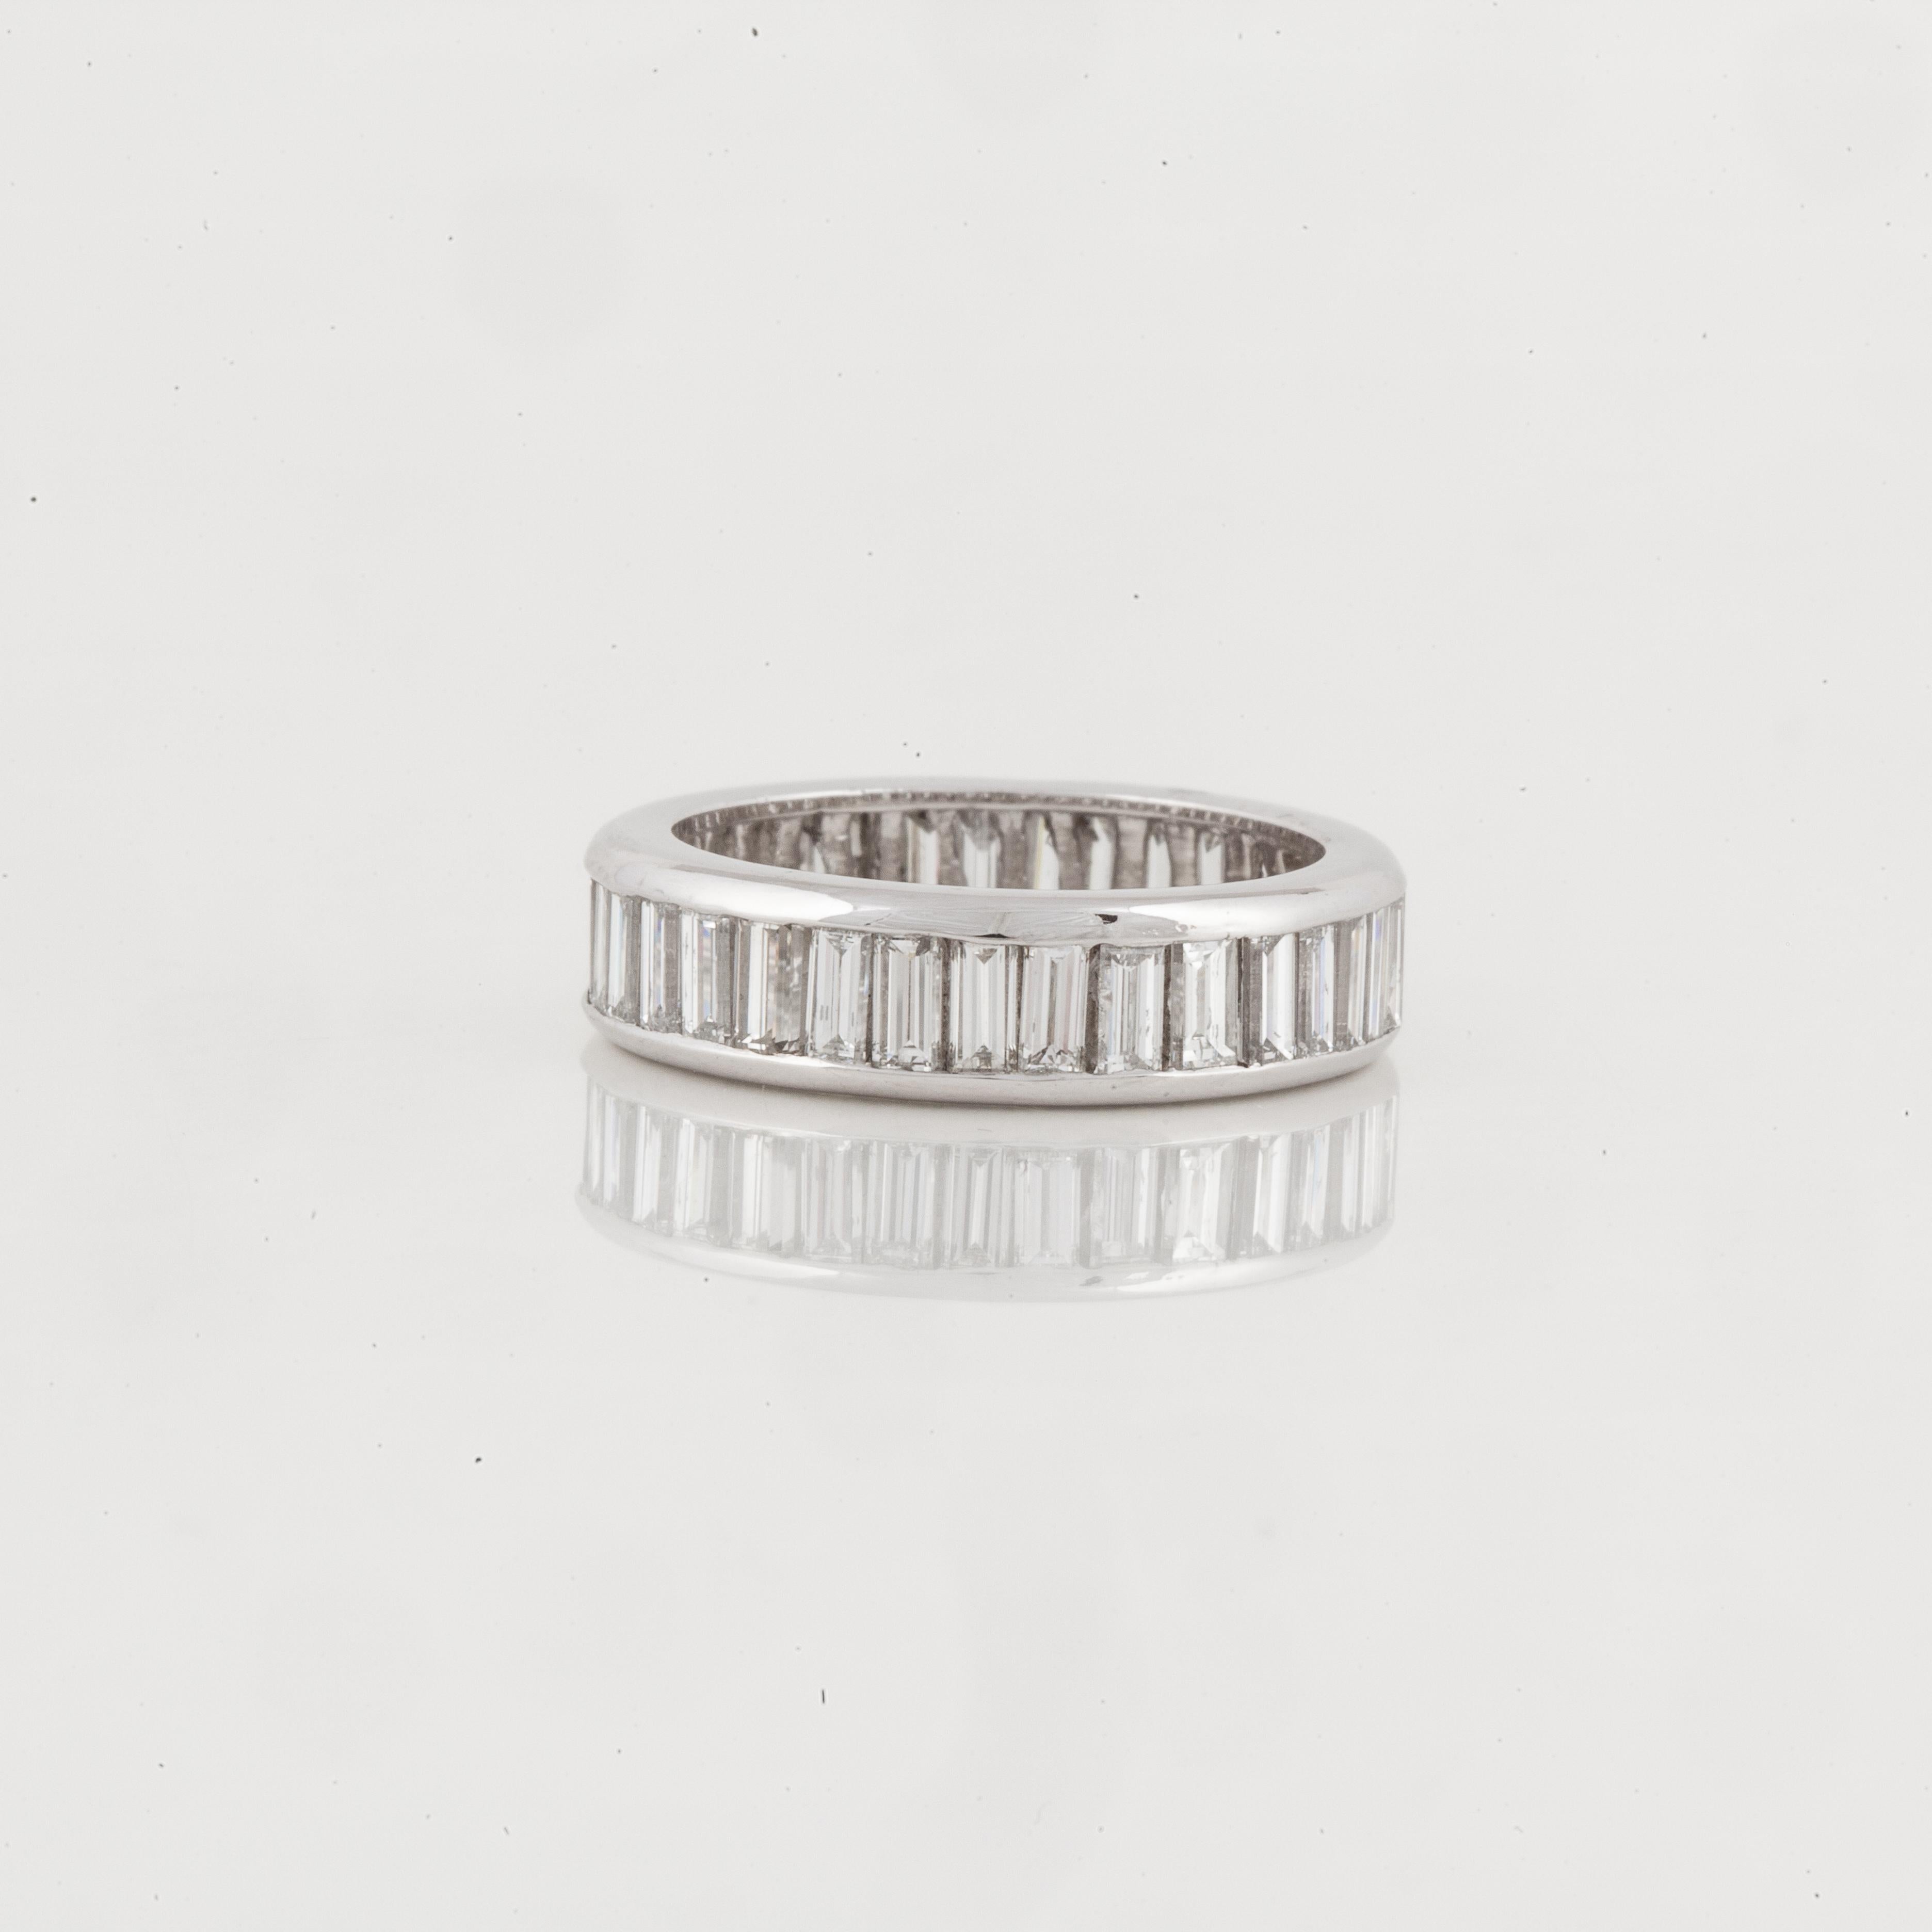 Diamond eternity band with thirty-six (36) channel-set baguette diamonds that total 3.50 carats ; H-I color and VS2-SI2 clarity.  Band is a size 7 and is 3/16 inches wide.